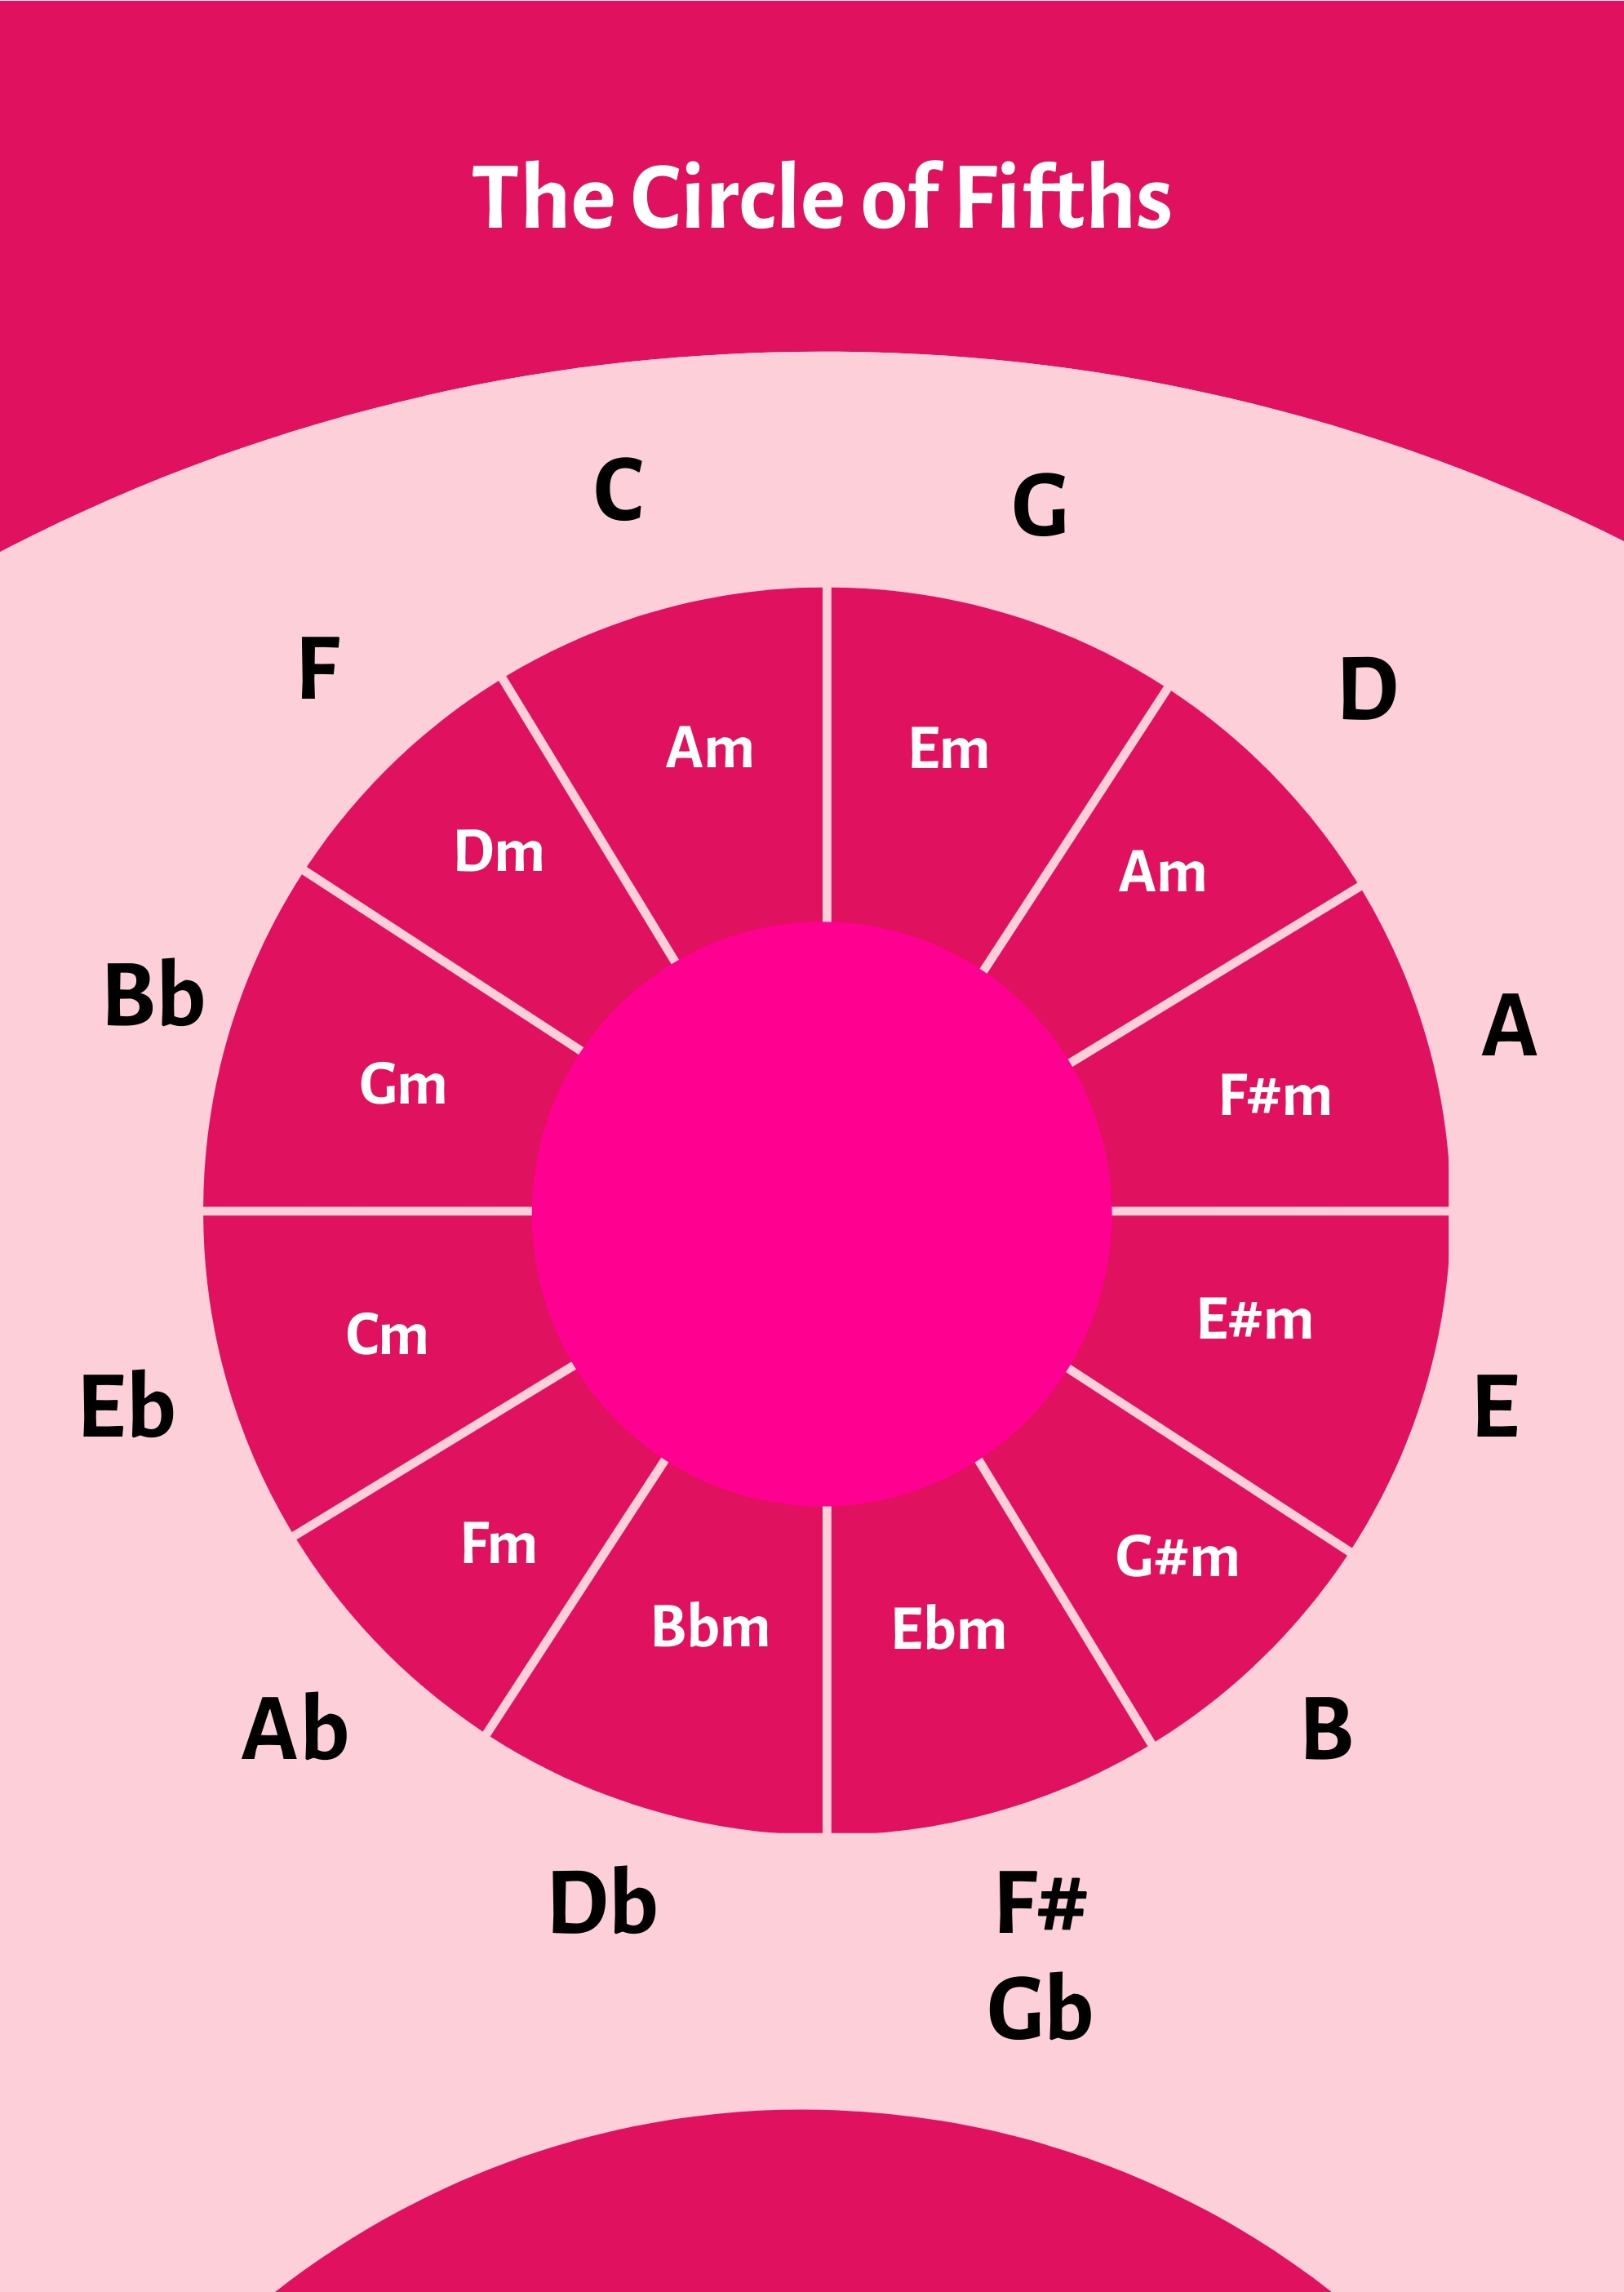 free-circle-of-fifths-chart-download-in-pdf-illustrator-template